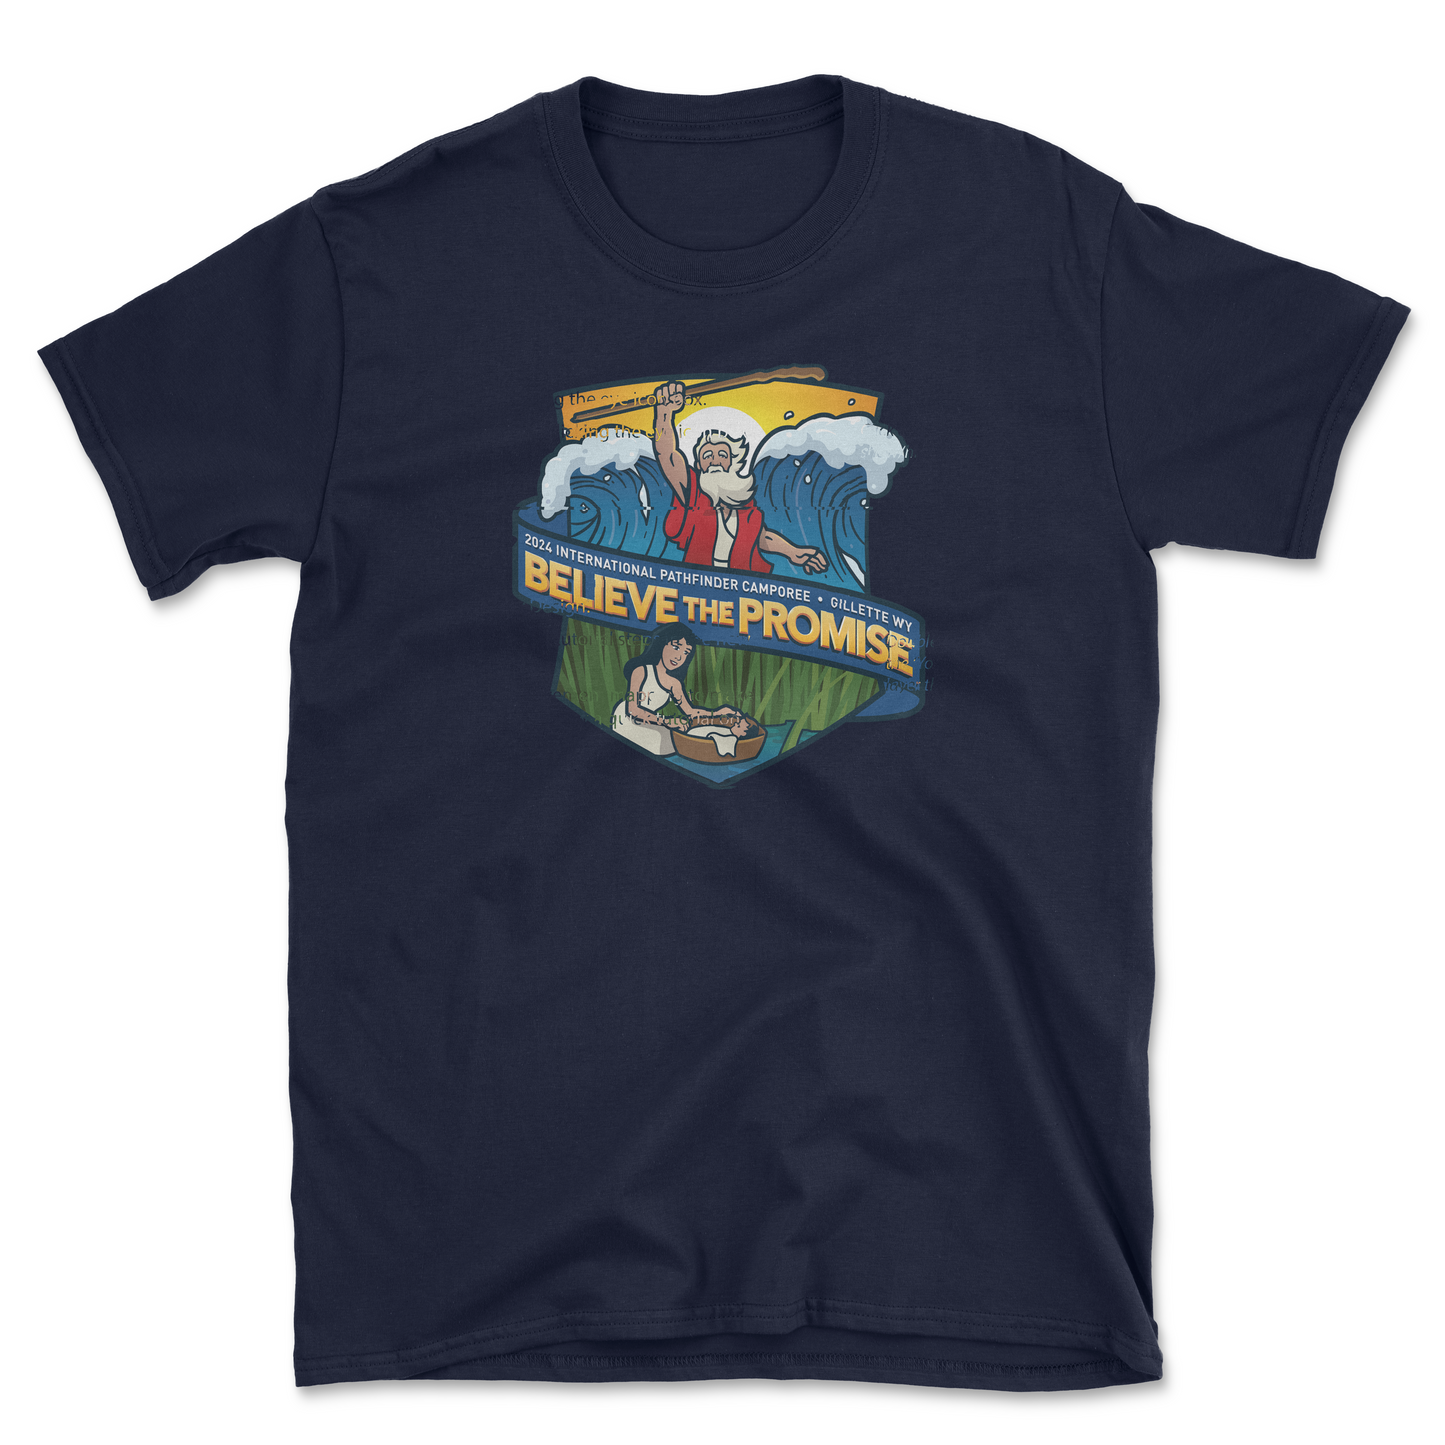 Believe the Promise Camporee T-shirt